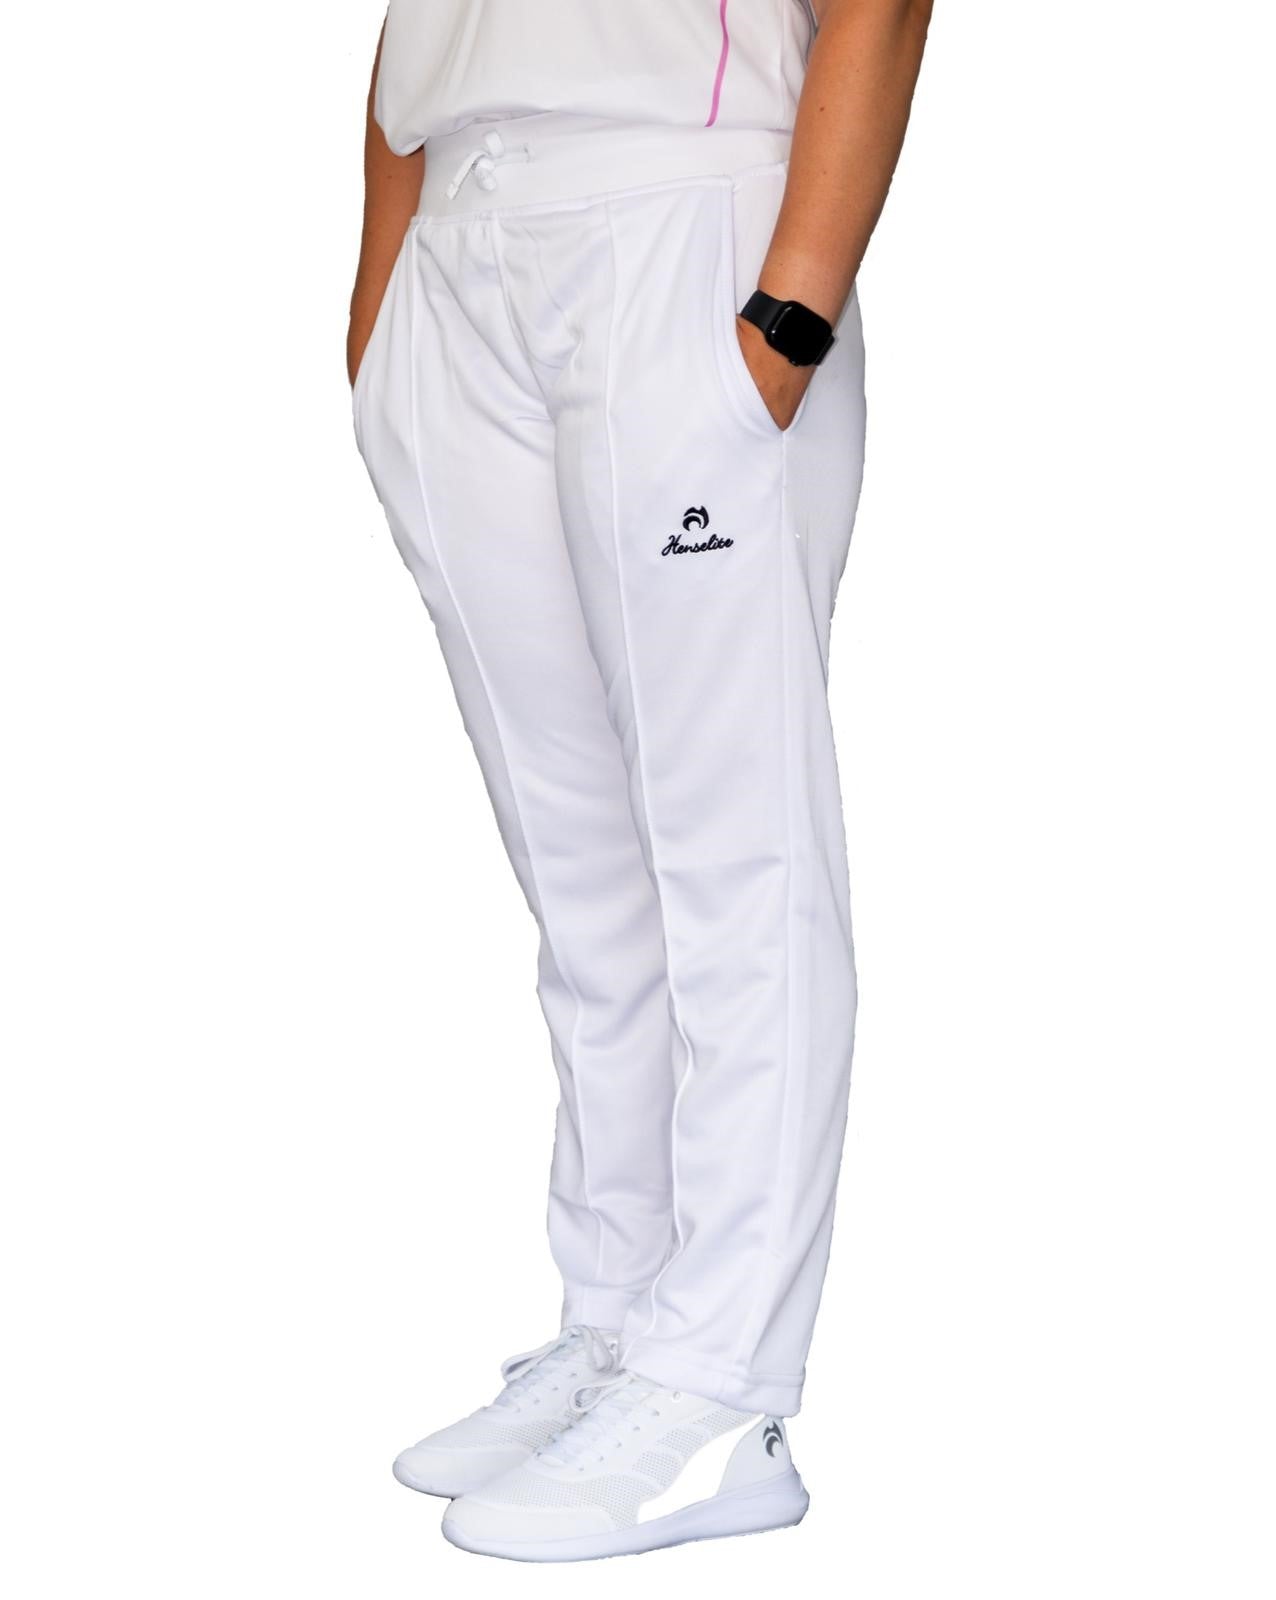 Henselite Ladies Fit High Waist Sports Trousers White